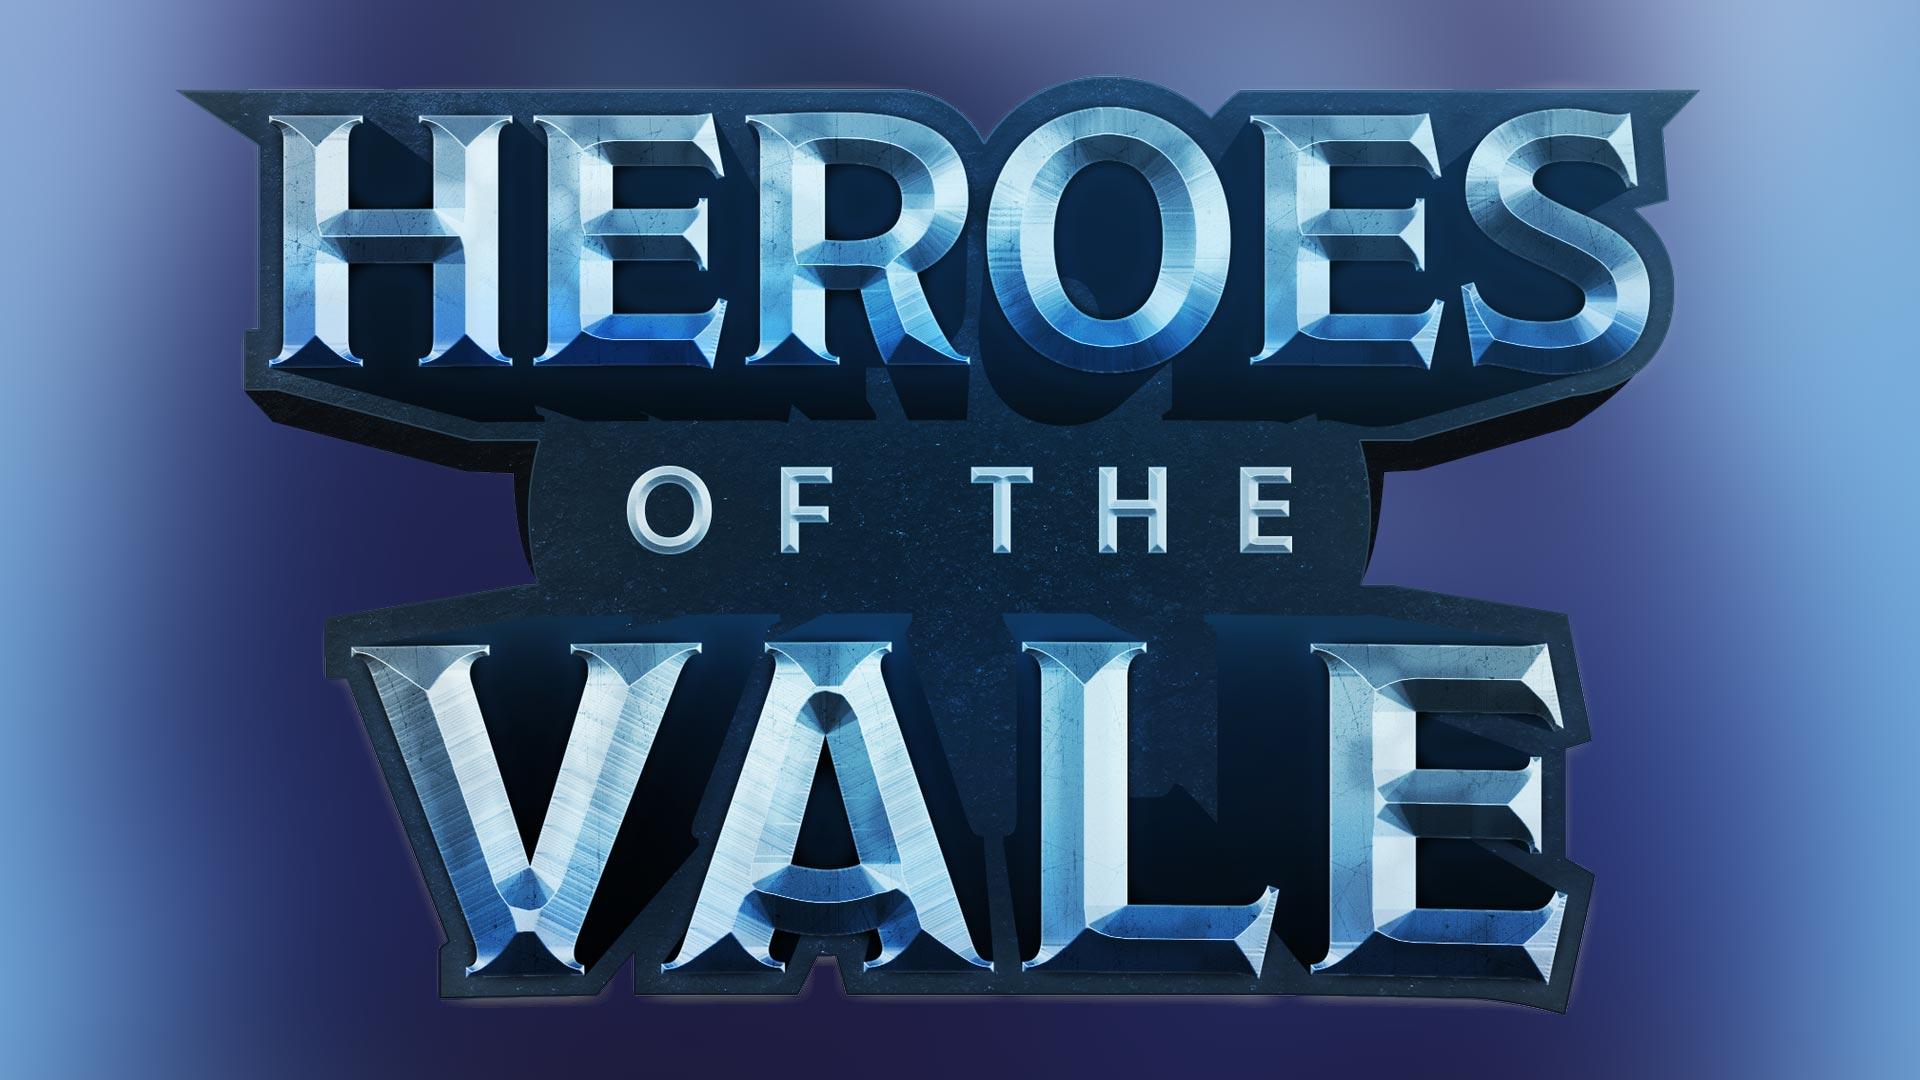 Heroes of the Vale